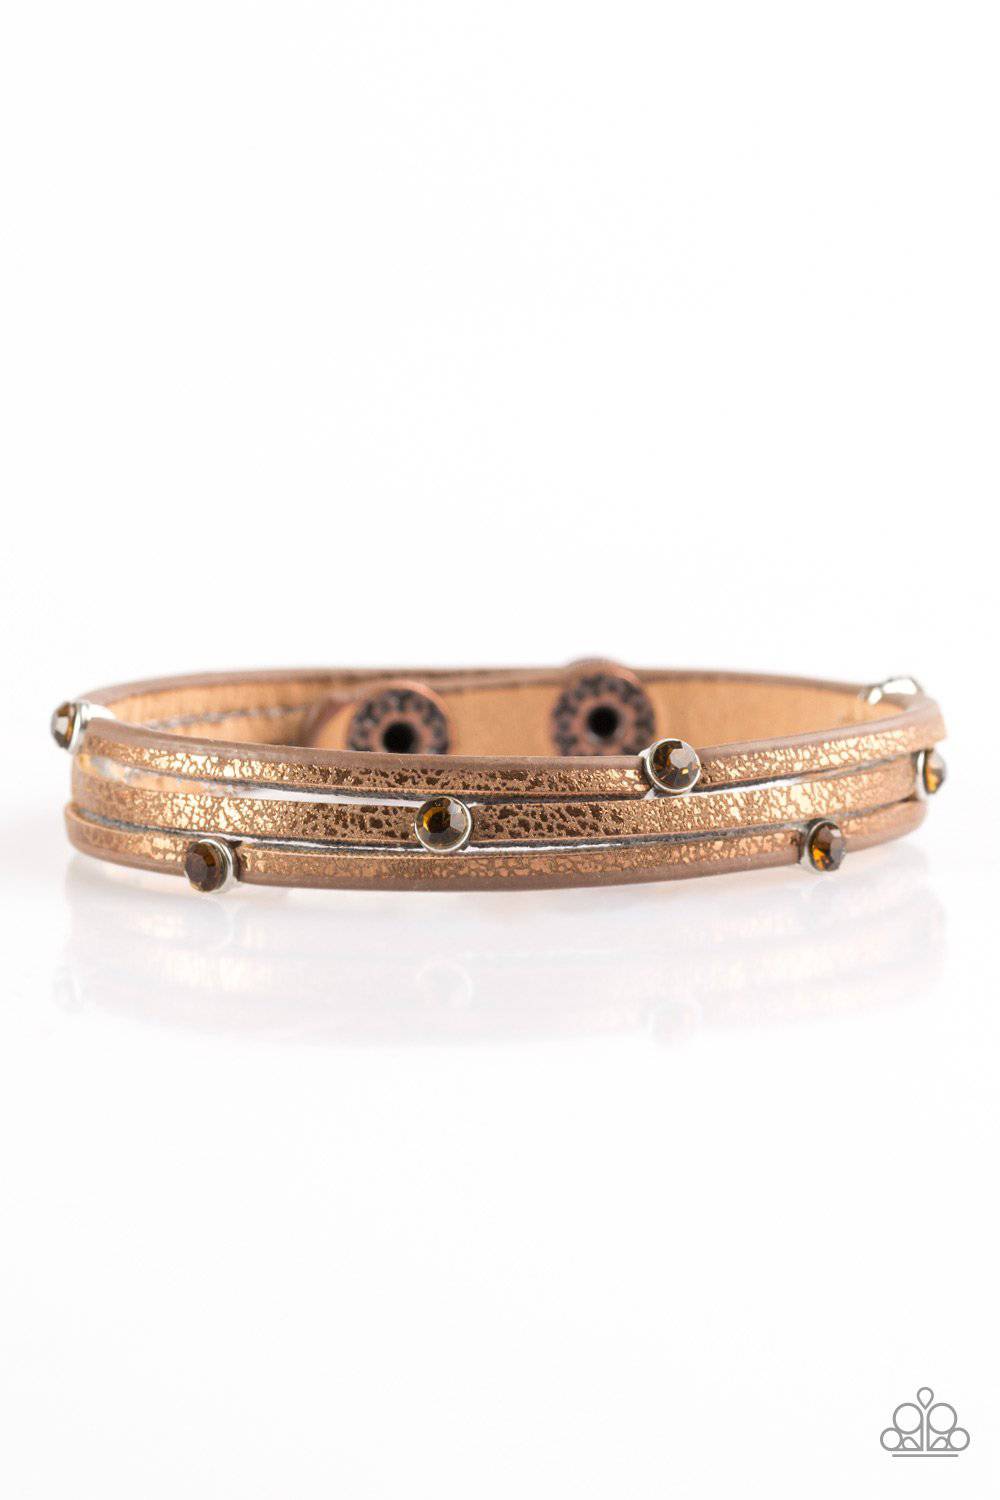 Drop A SHINE - Copper Shimmer Brown Leather Bracelet - Paparazzi Accessories - GlaMarous Titi Jewels